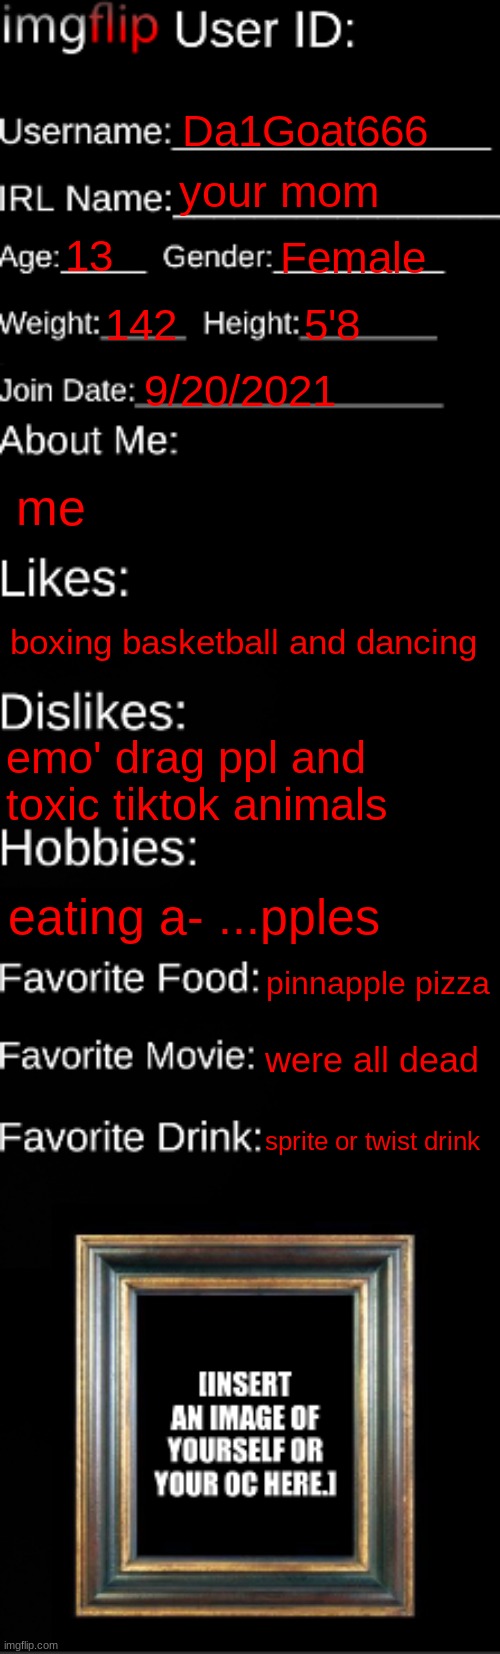 imgflip ID Card | Da1Goat666; your mom; 13; Female; 142; 5'8; 9/20/2021; me; boxing basketball and dancing; emo' drag ppl and toxic tiktok animals; eating a- ...pples; pinnapple pizza; were all dead; sprite or twist drink | image tagged in imgflip id card | made w/ Imgflip meme maker